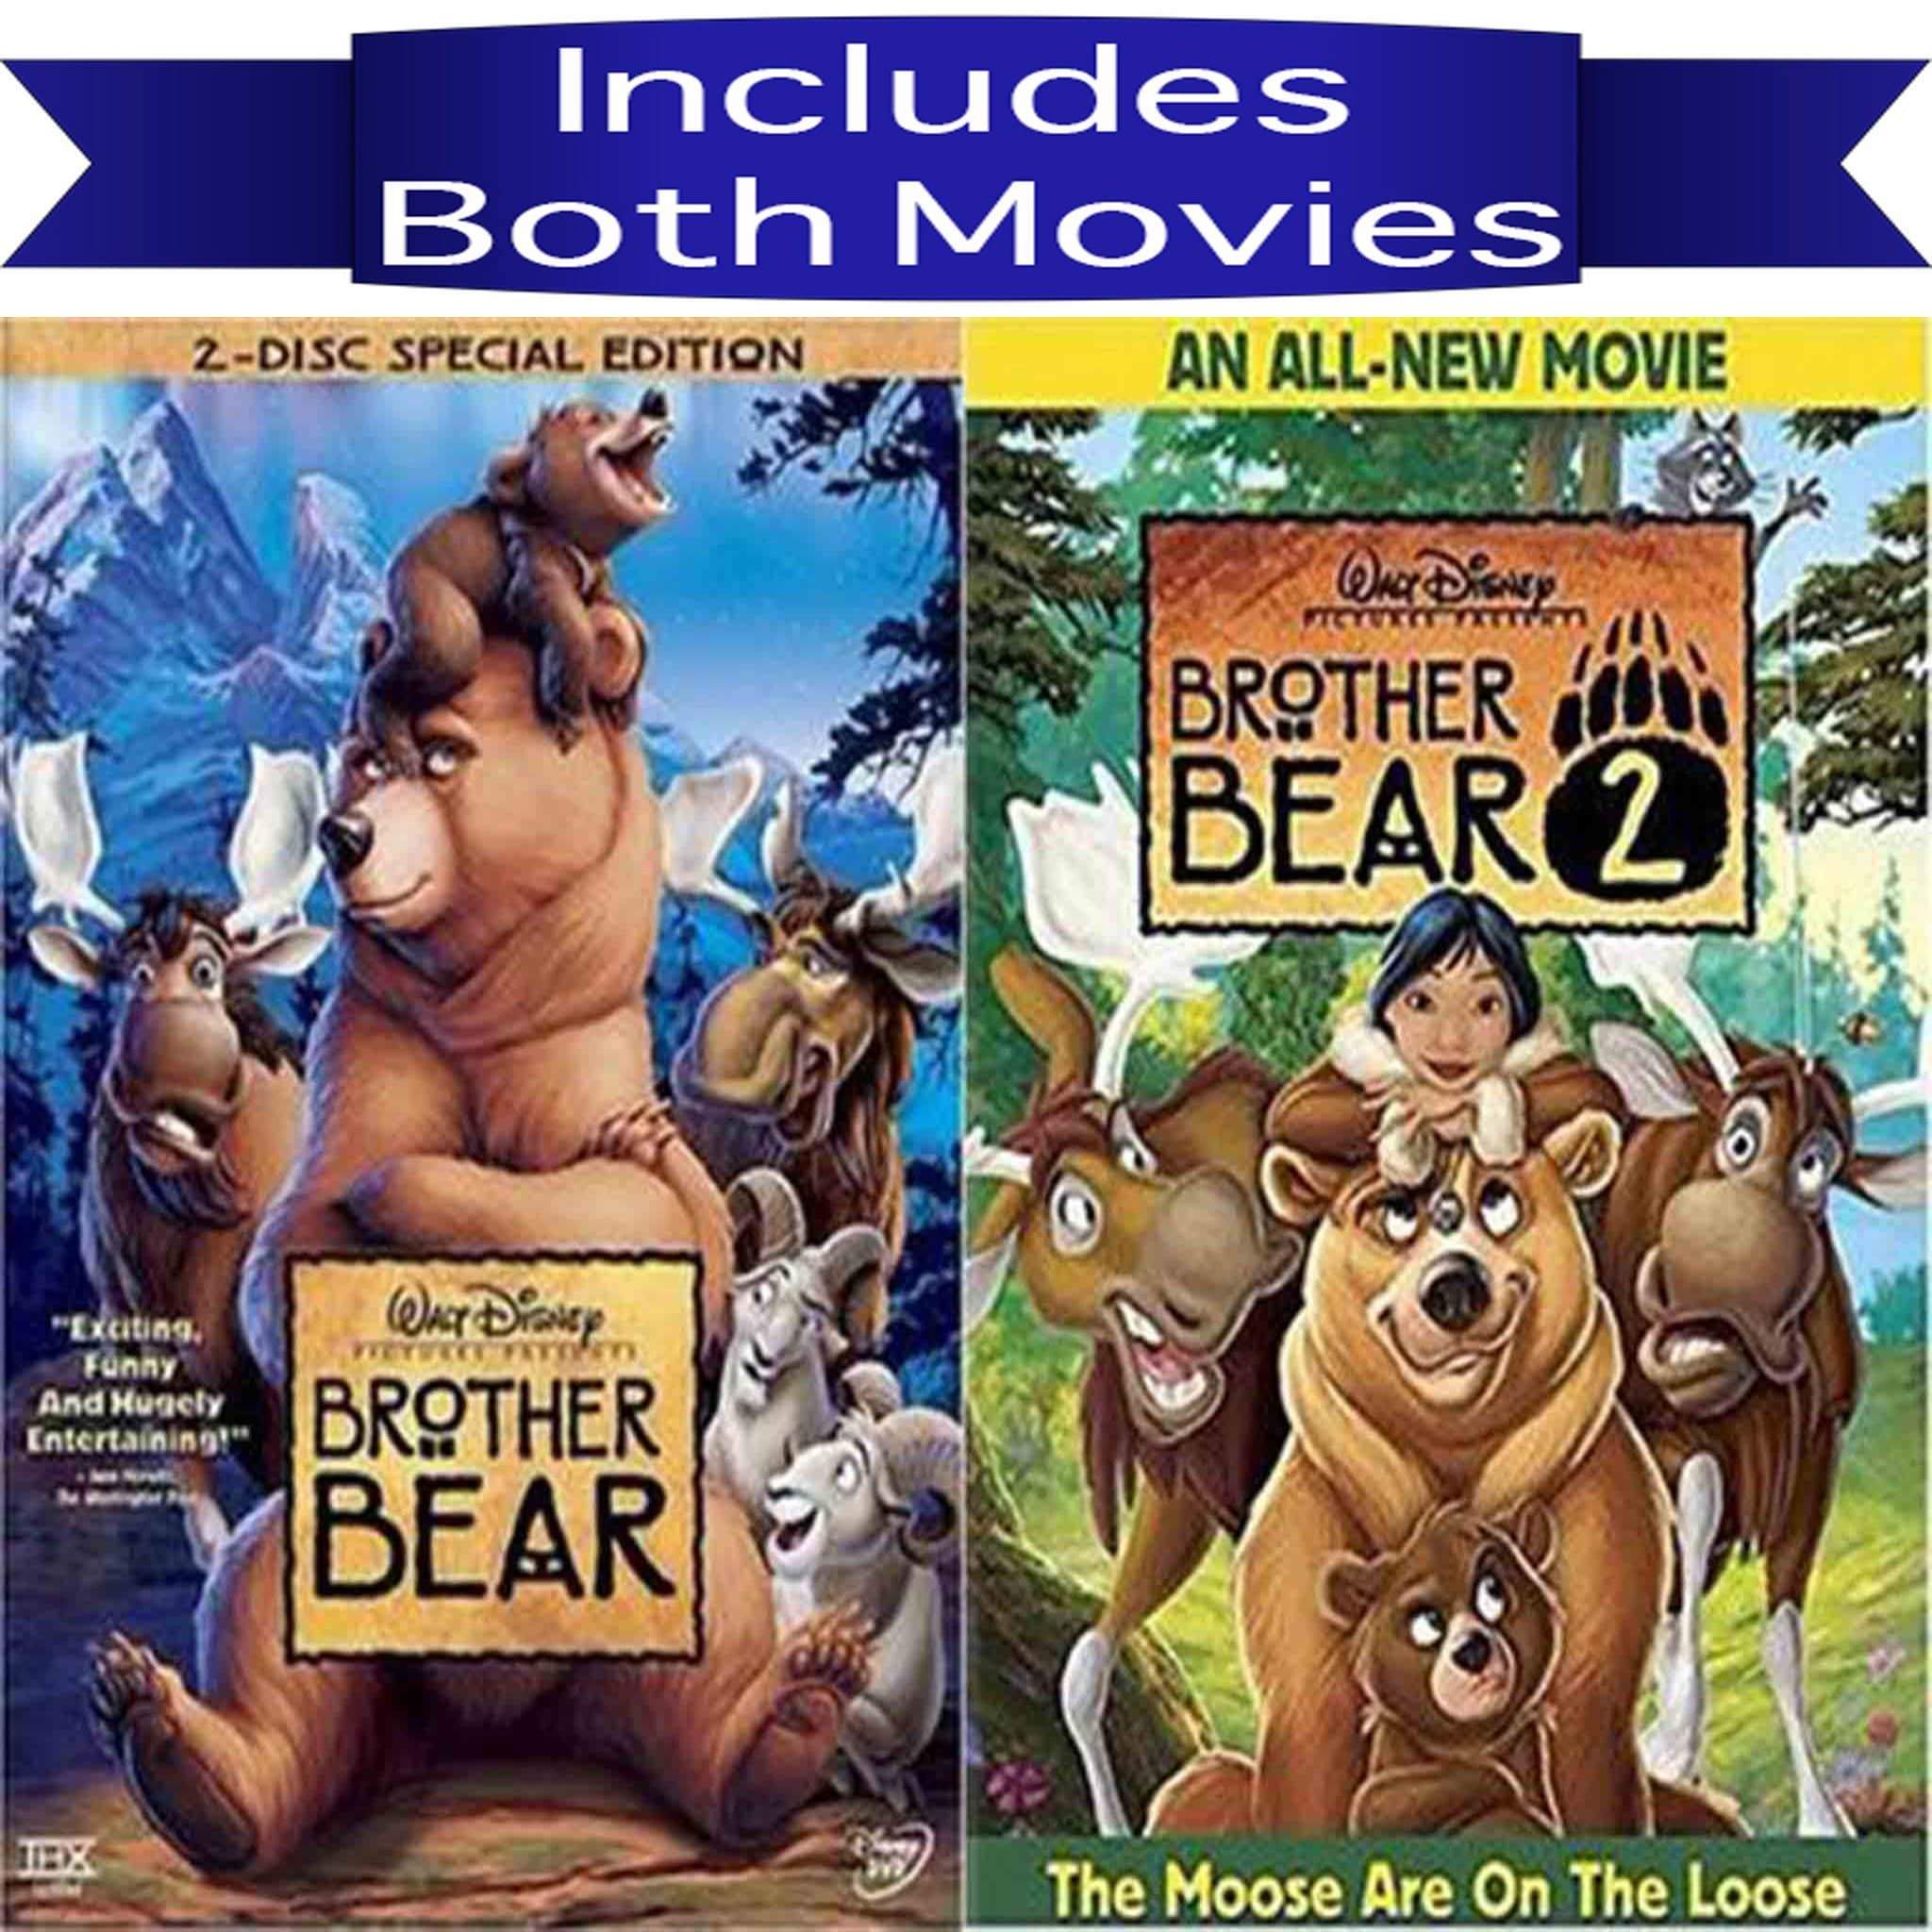 Disney's Brother Bear 1&2 DVD Set Includes both Movies